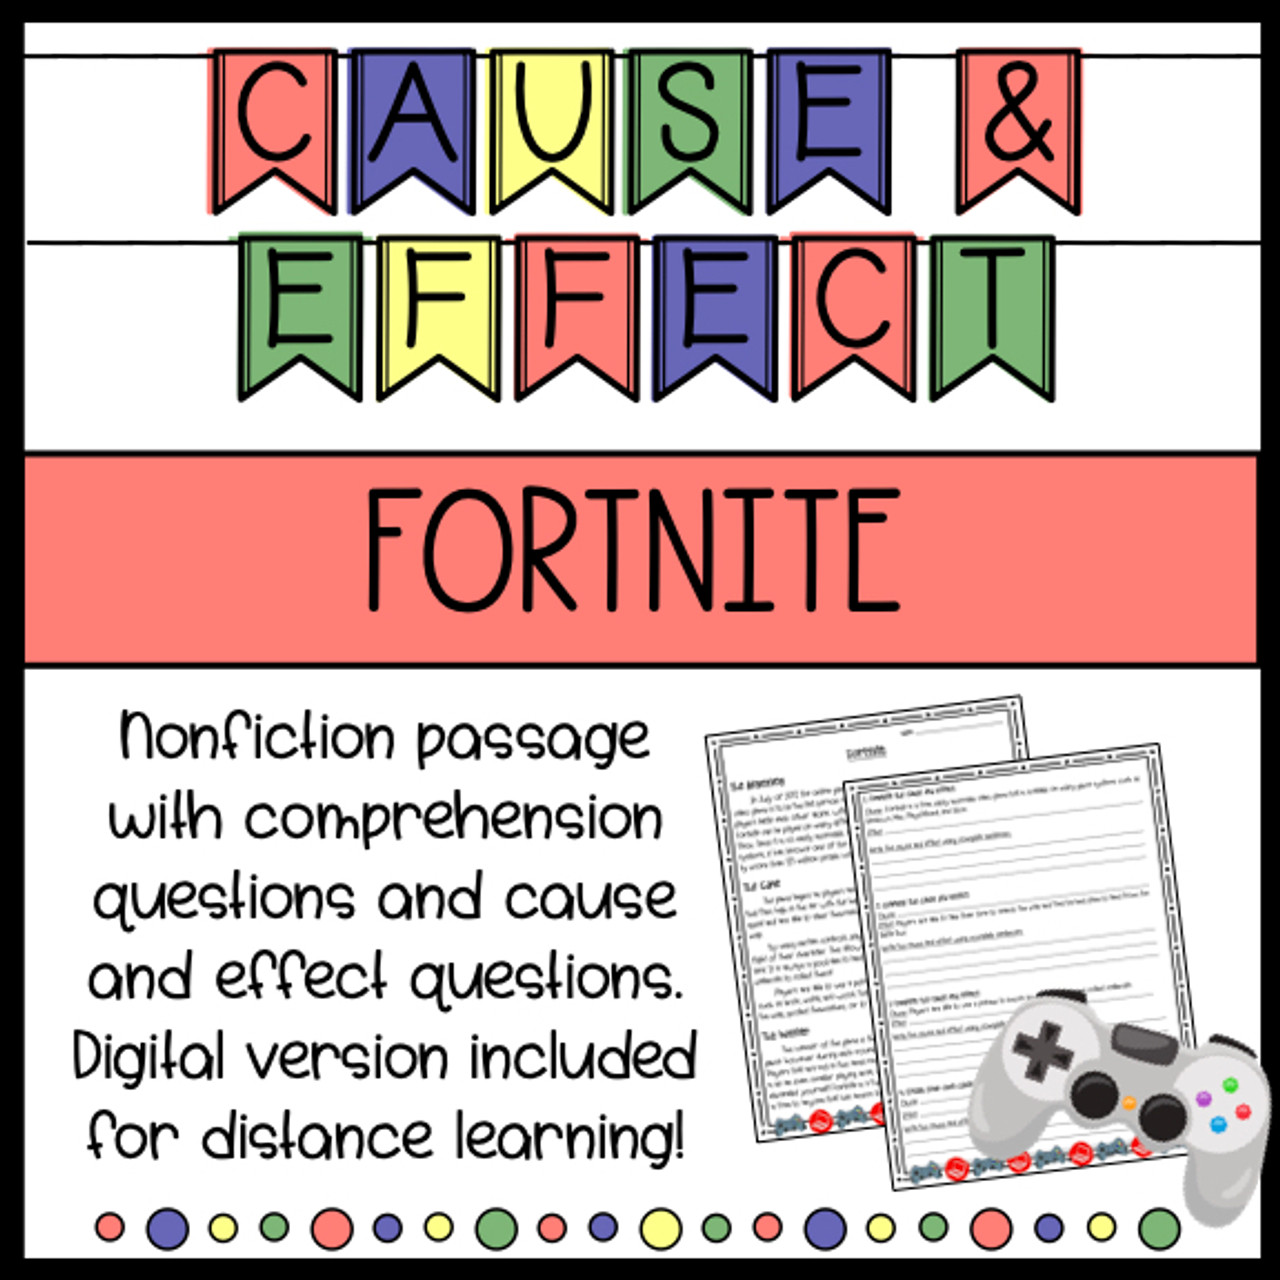 Up　Nonfiction　Amped　Comprehension　Effect　Fortnite　and　Cause　Reading　Learning　Distance　Learning